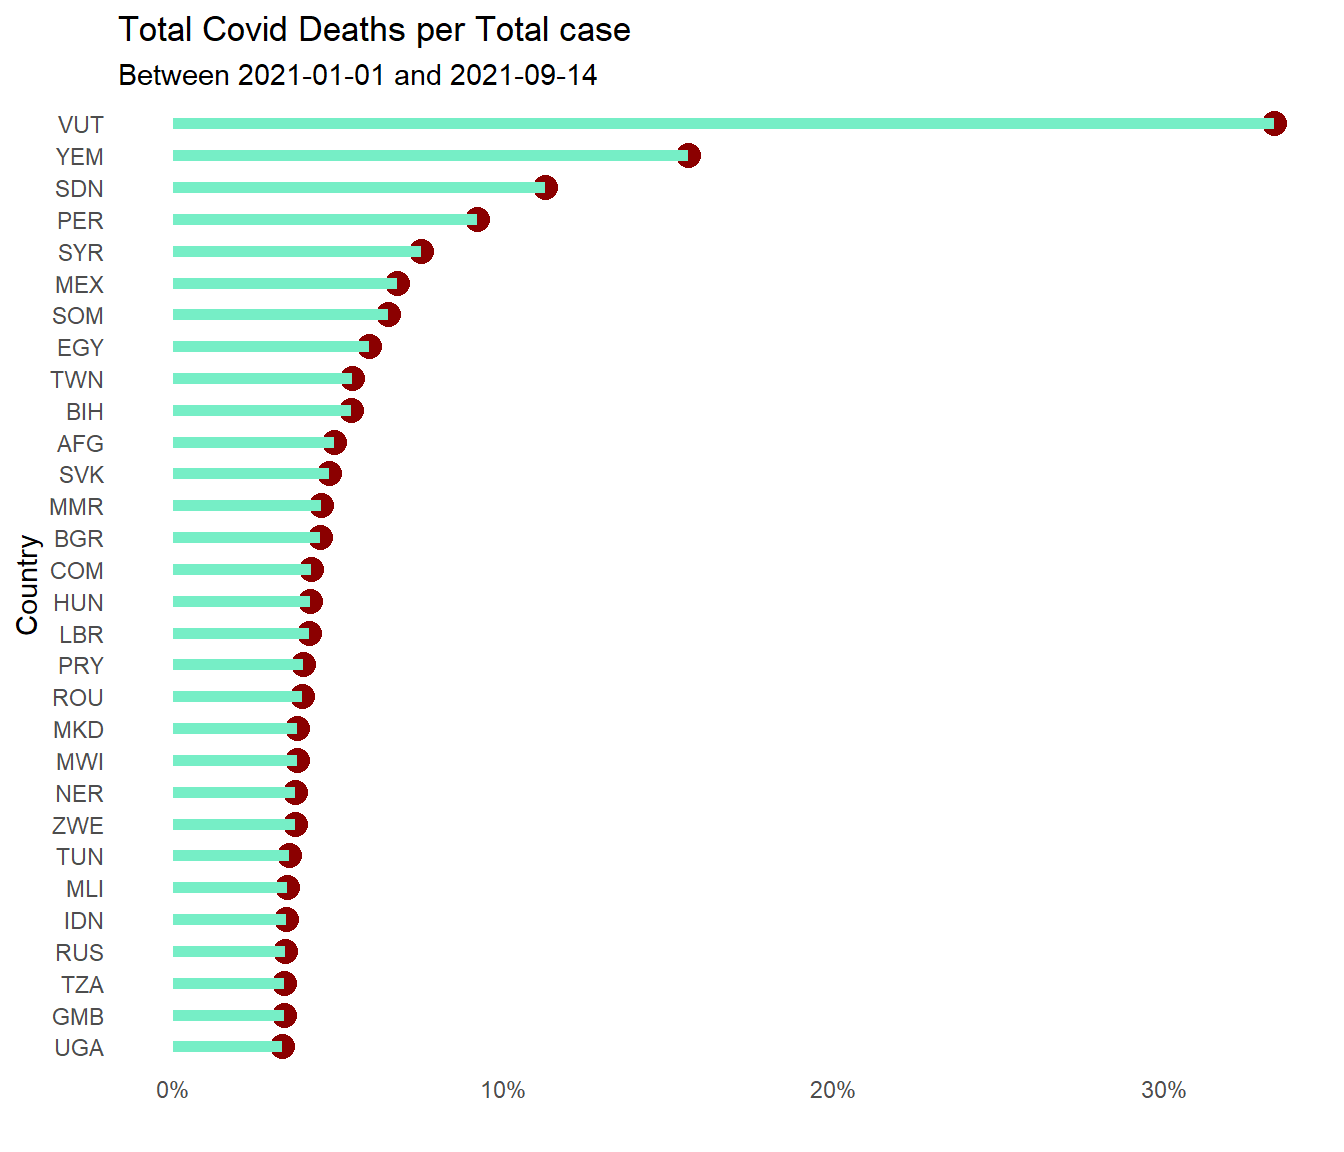 Sorted Cleveland dot plot of worst 30 countries for total Covid deaths per total case